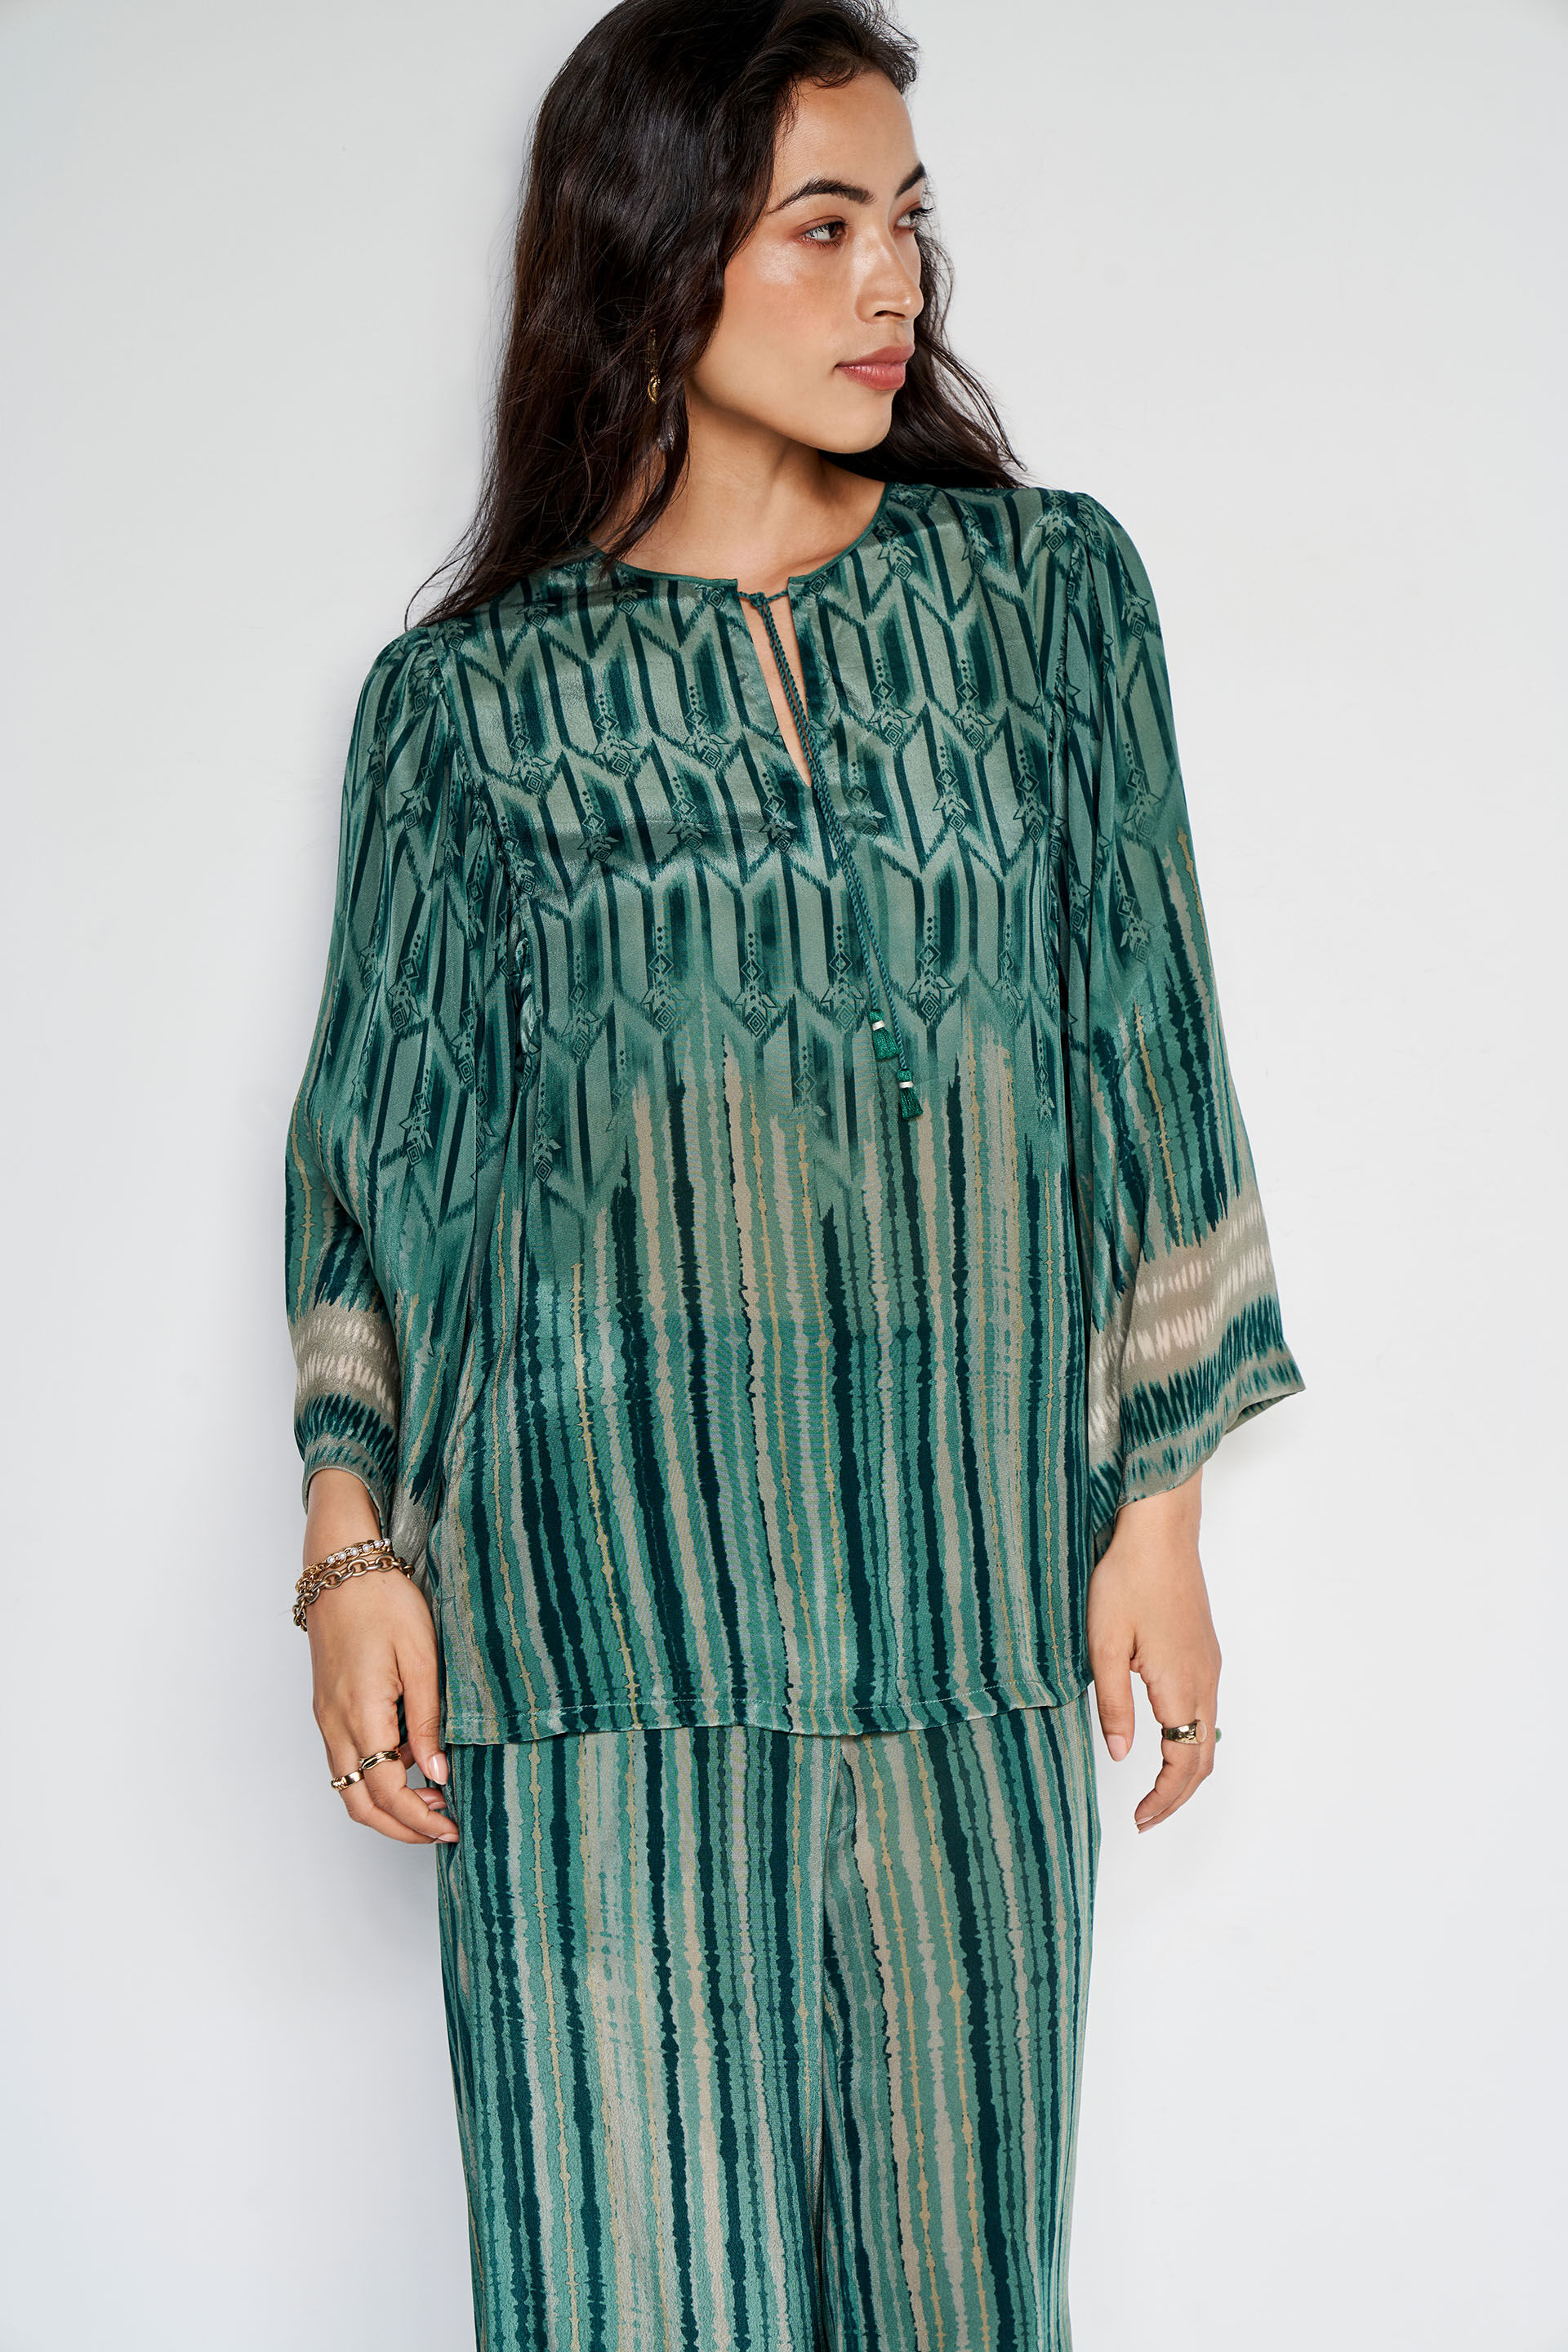 Buy Paola Coord Set - Green from Anita Dongre's Co-Ord-Sets for Women.